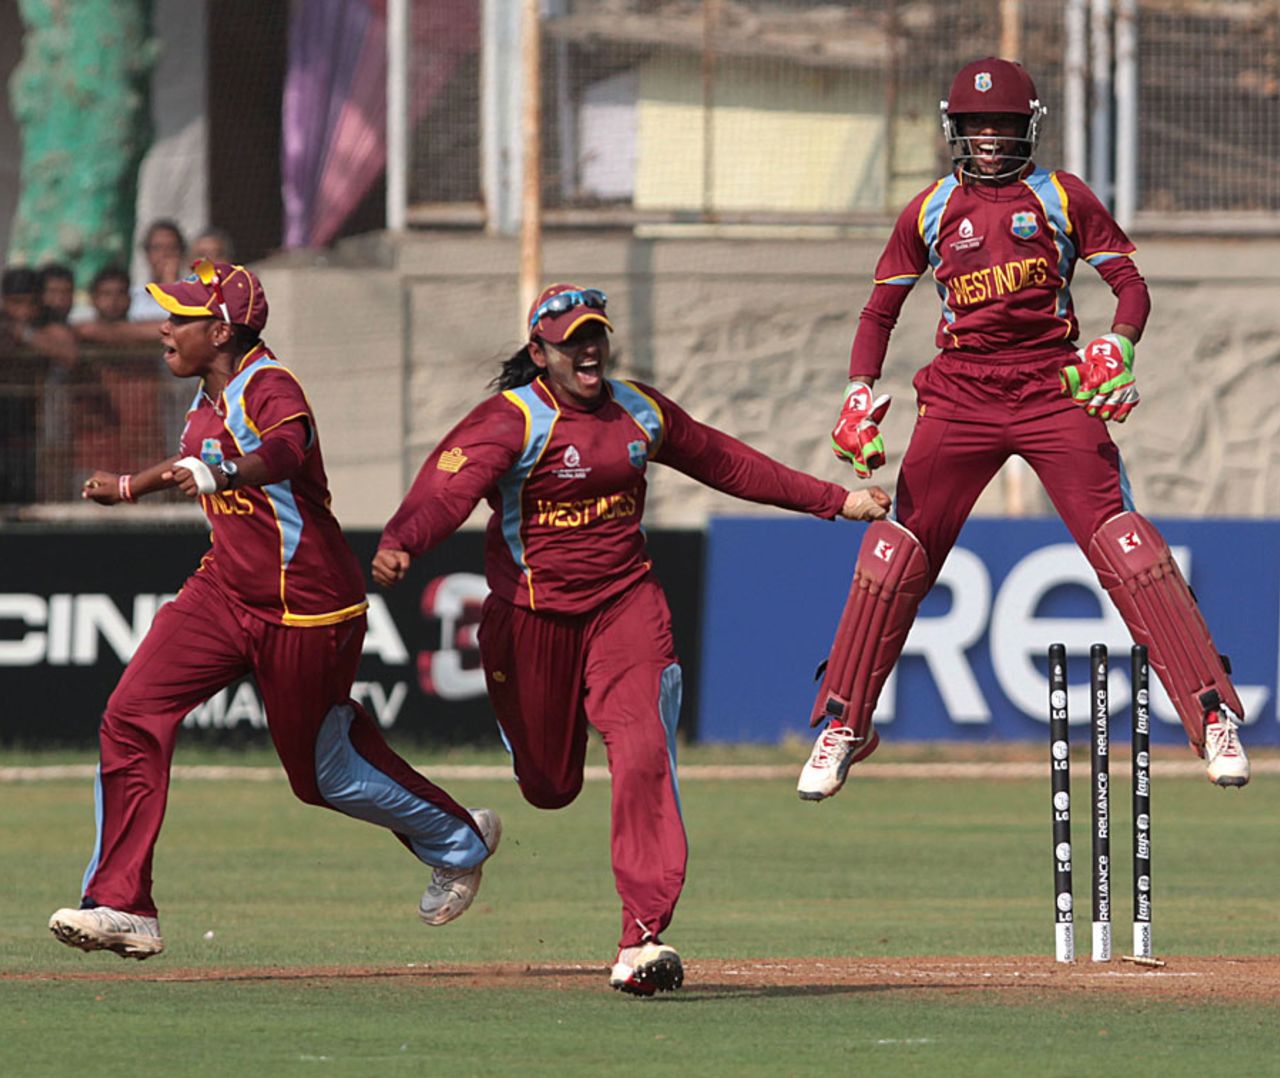 West Indies players react after defeating Australia to reach their first World Cup final, Australia v West Indies, Women's World Cup 2013, Super Six, Mumbai, February 13, 2013